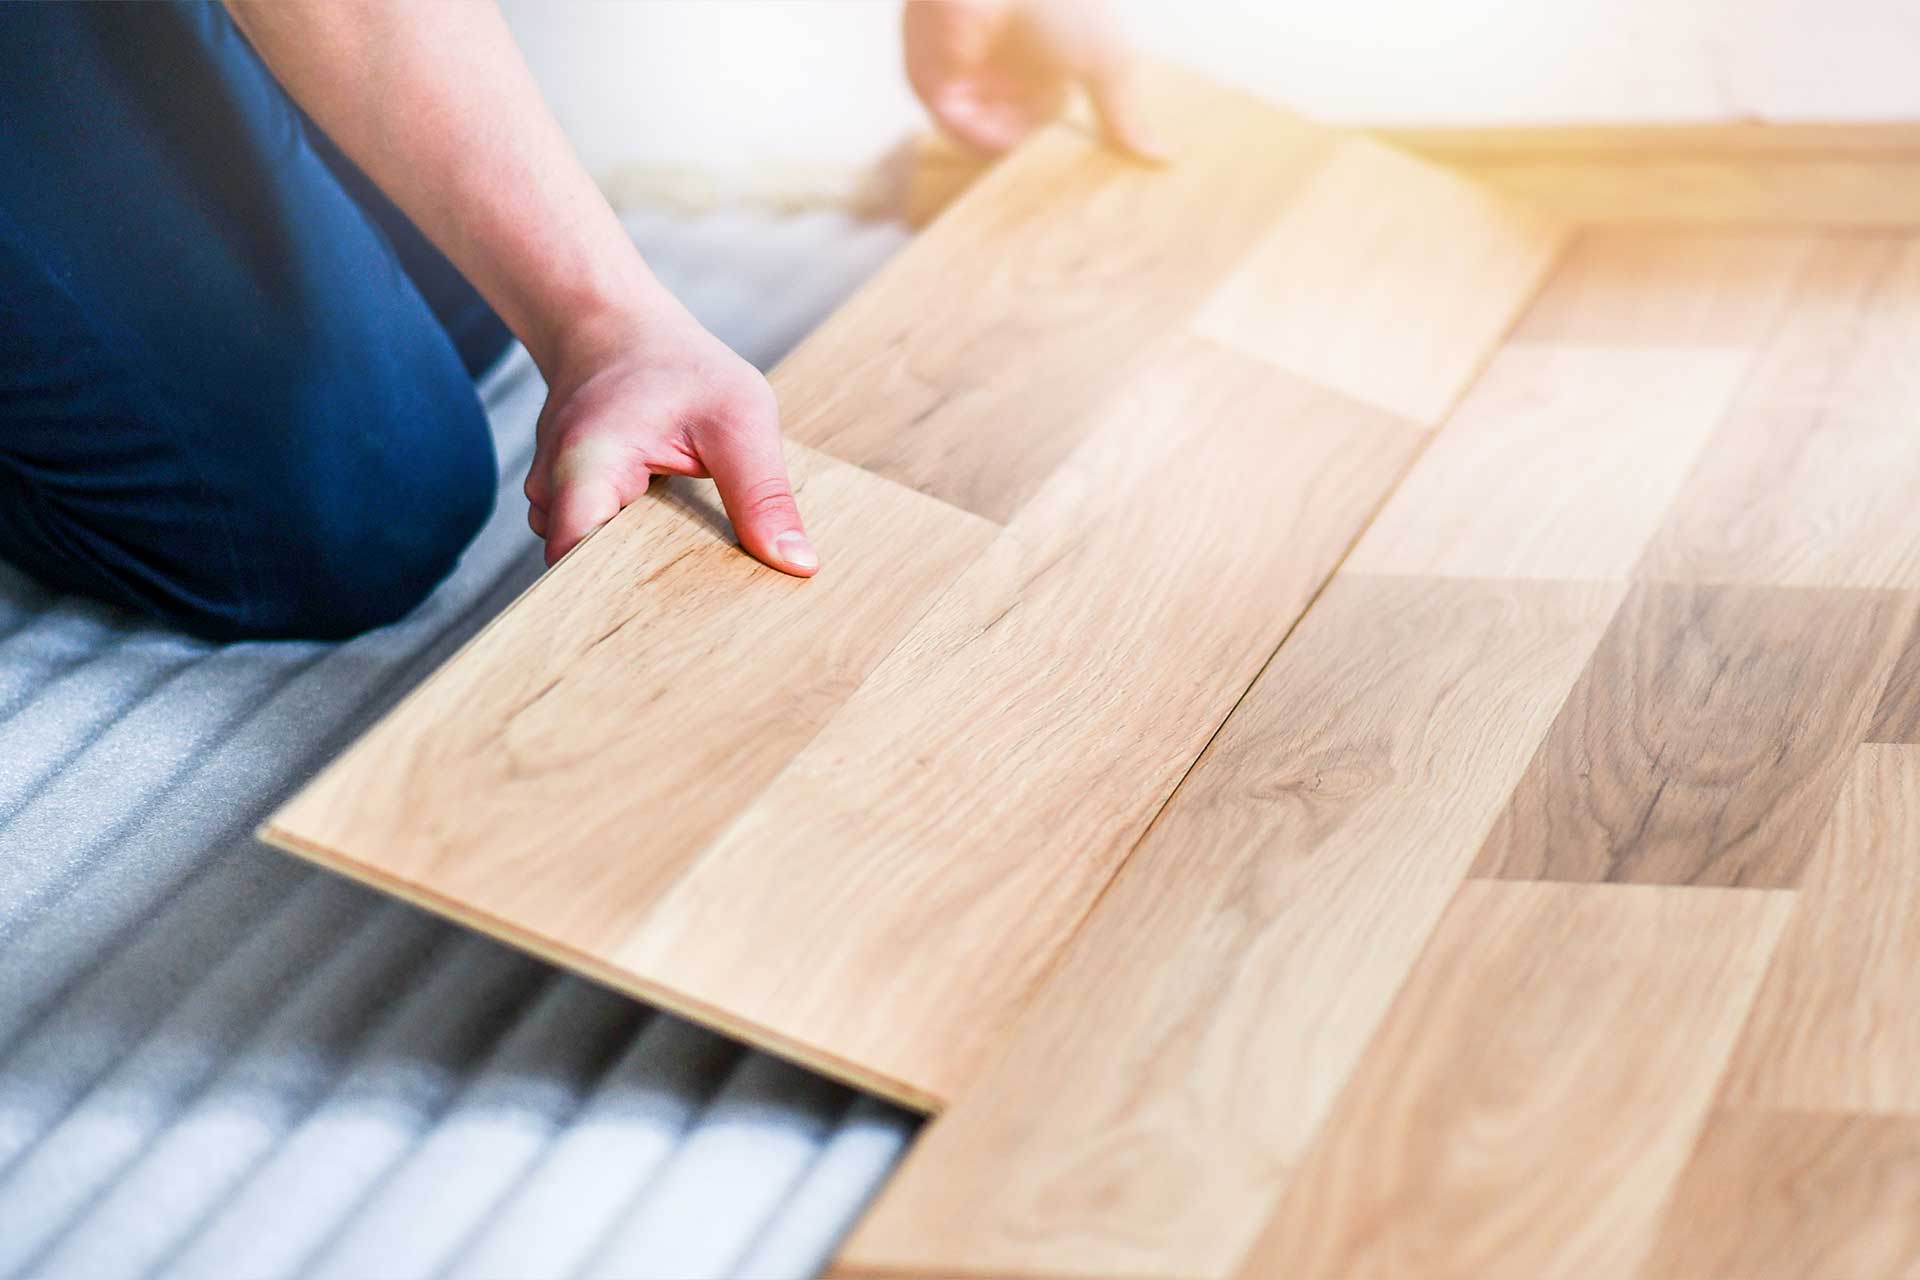 Laminate Flooring Fitting Cost In 2021, How Much Does It Cost To Install Laminate Flooring Uk 2020